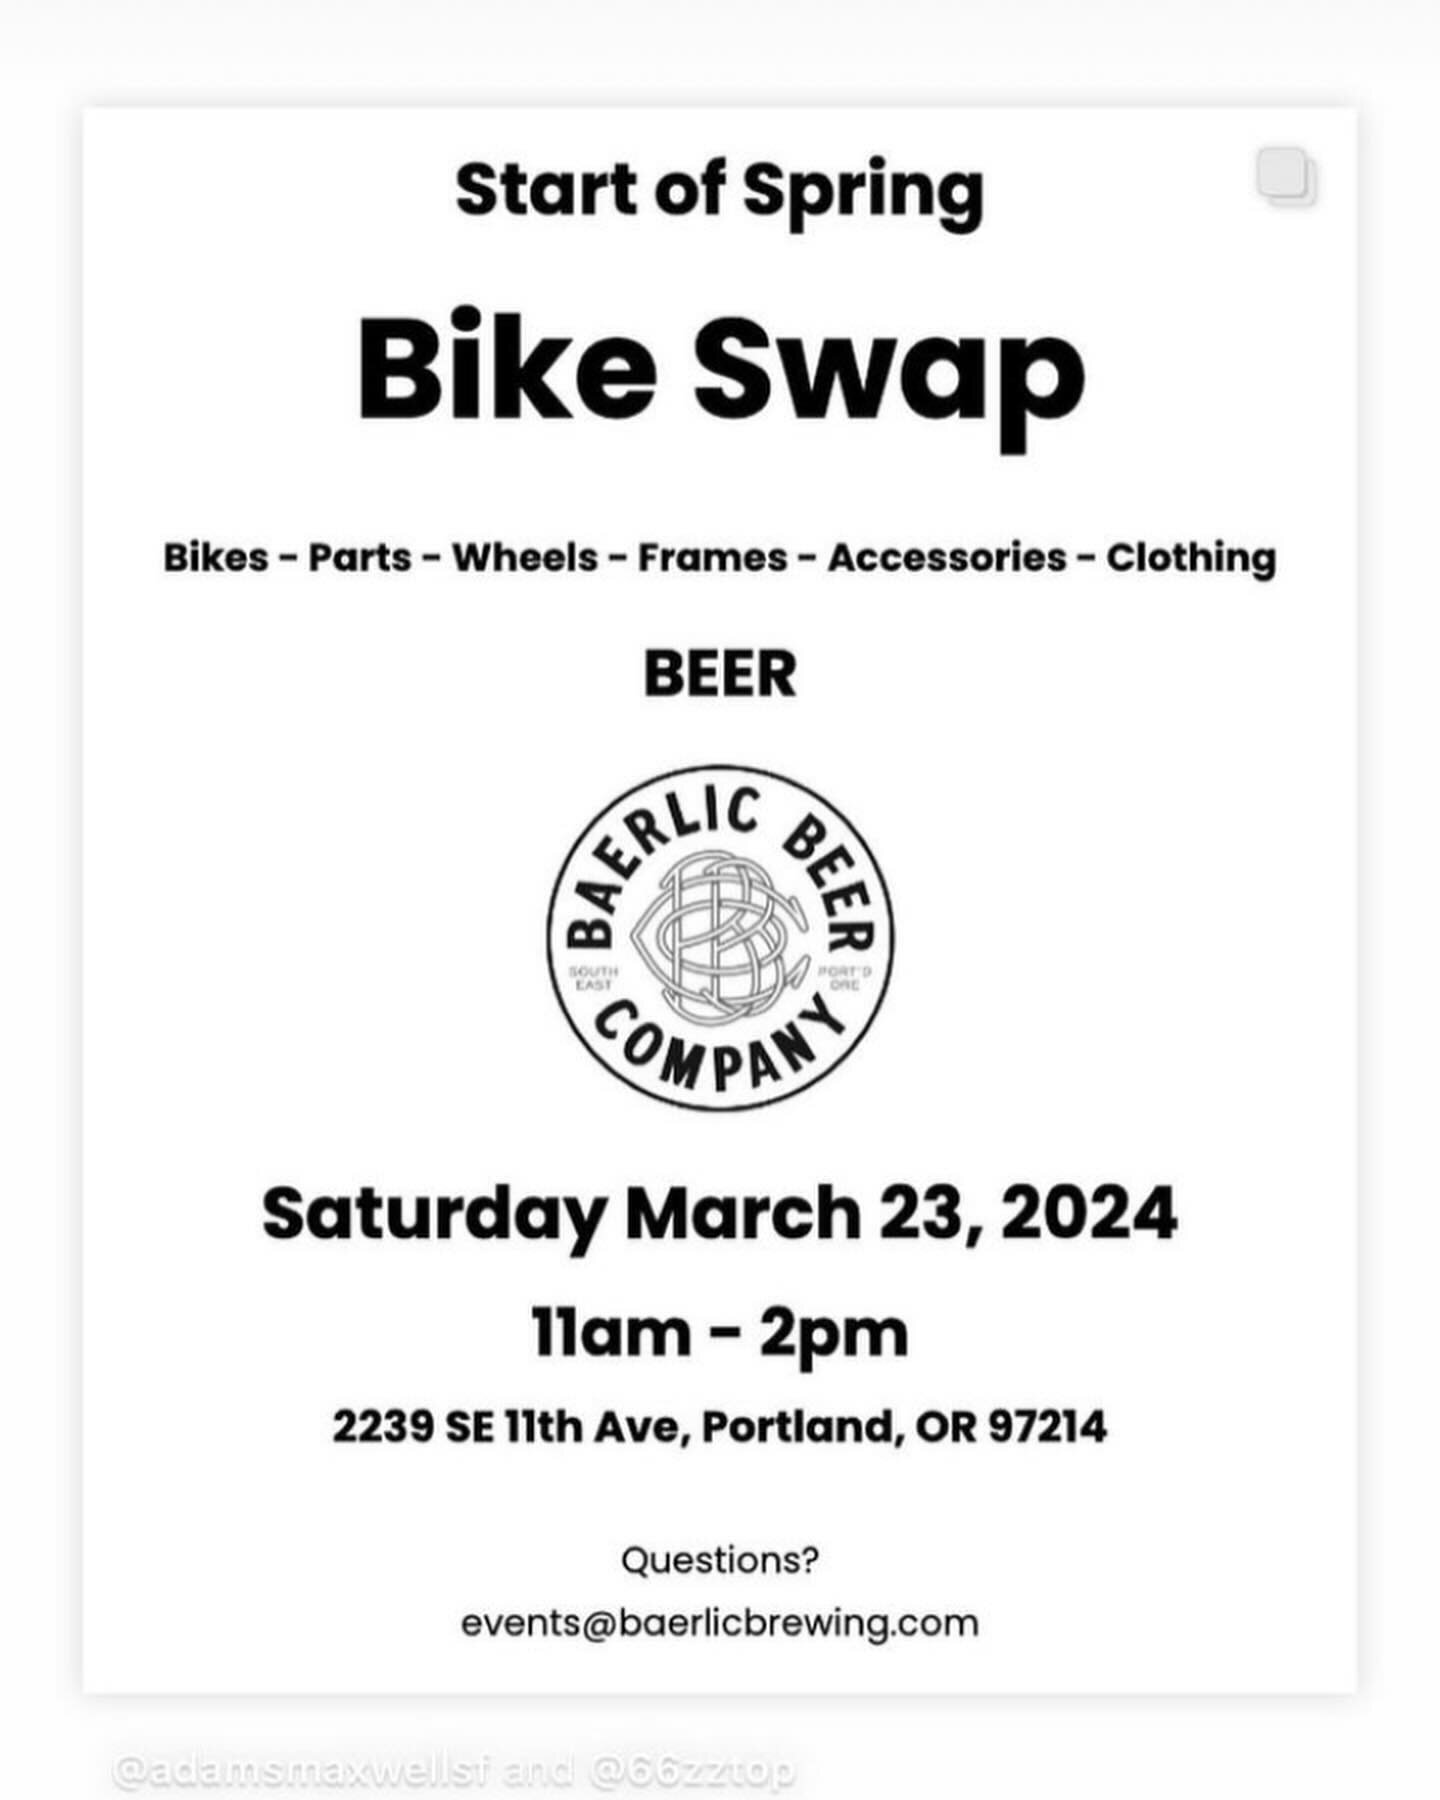 We&rsquo;ll be selling basket bags and sewing on patches tomorrow Saturday 3/23 11a-2p @baerlicbrewing taproom on SE 11th. Also - @pink.tag.bags @nomadpatches @brightlightupcycles #sluggageislit